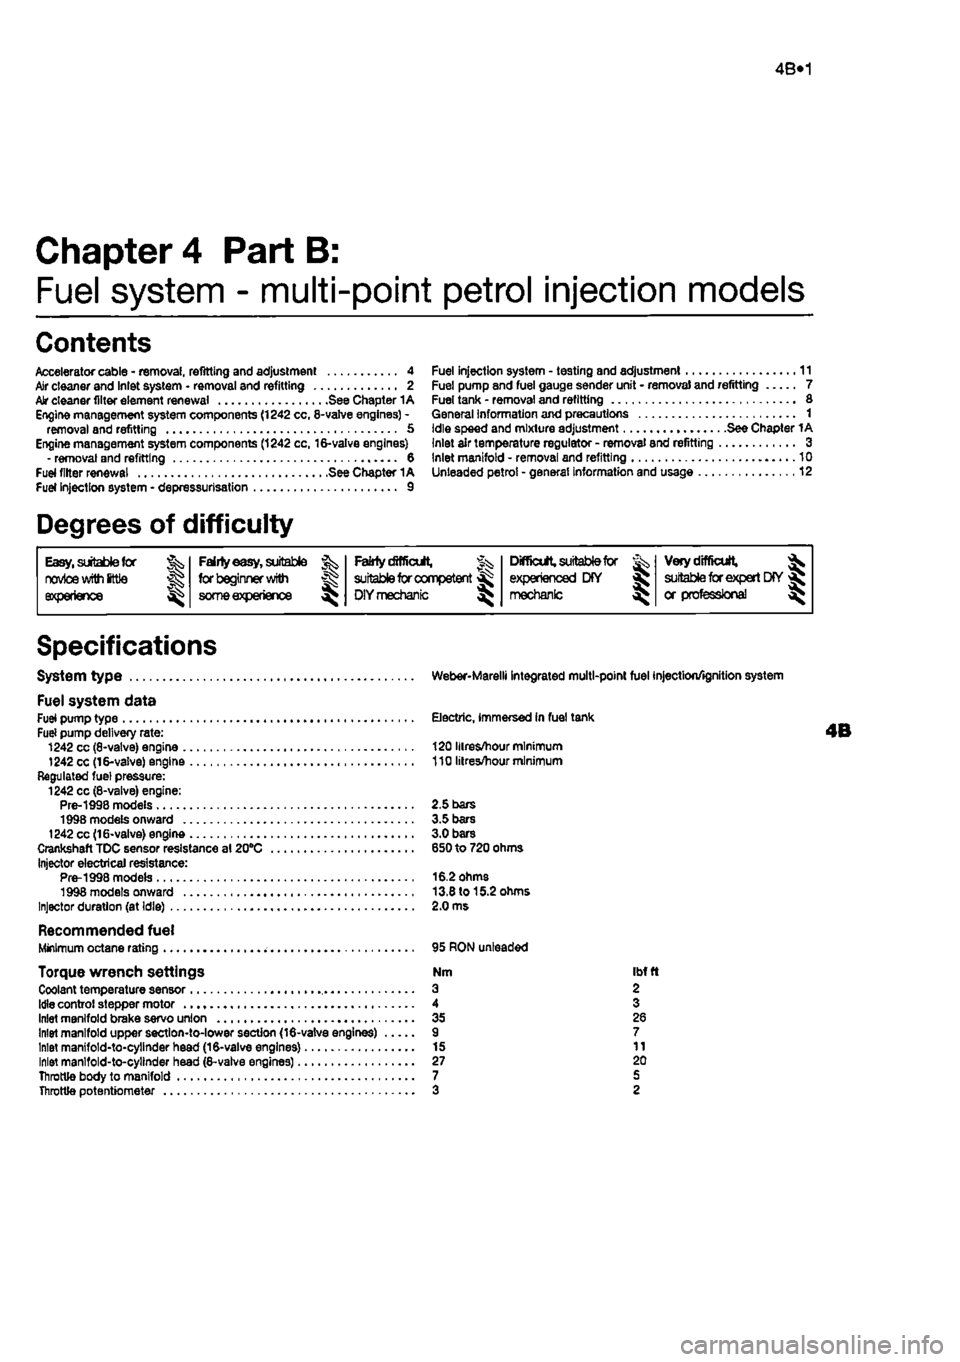 FIAT PUNTO 1995 176 / 1.G Owners Manual 
4B*1 
Chapter 4 Part B: 
Fuel system - multi-point petrol injection models 
Contents 
Accelerator cable - removal, refitting and adjustment 4 Air cleaner and Inlet system • removal and refitting 2 